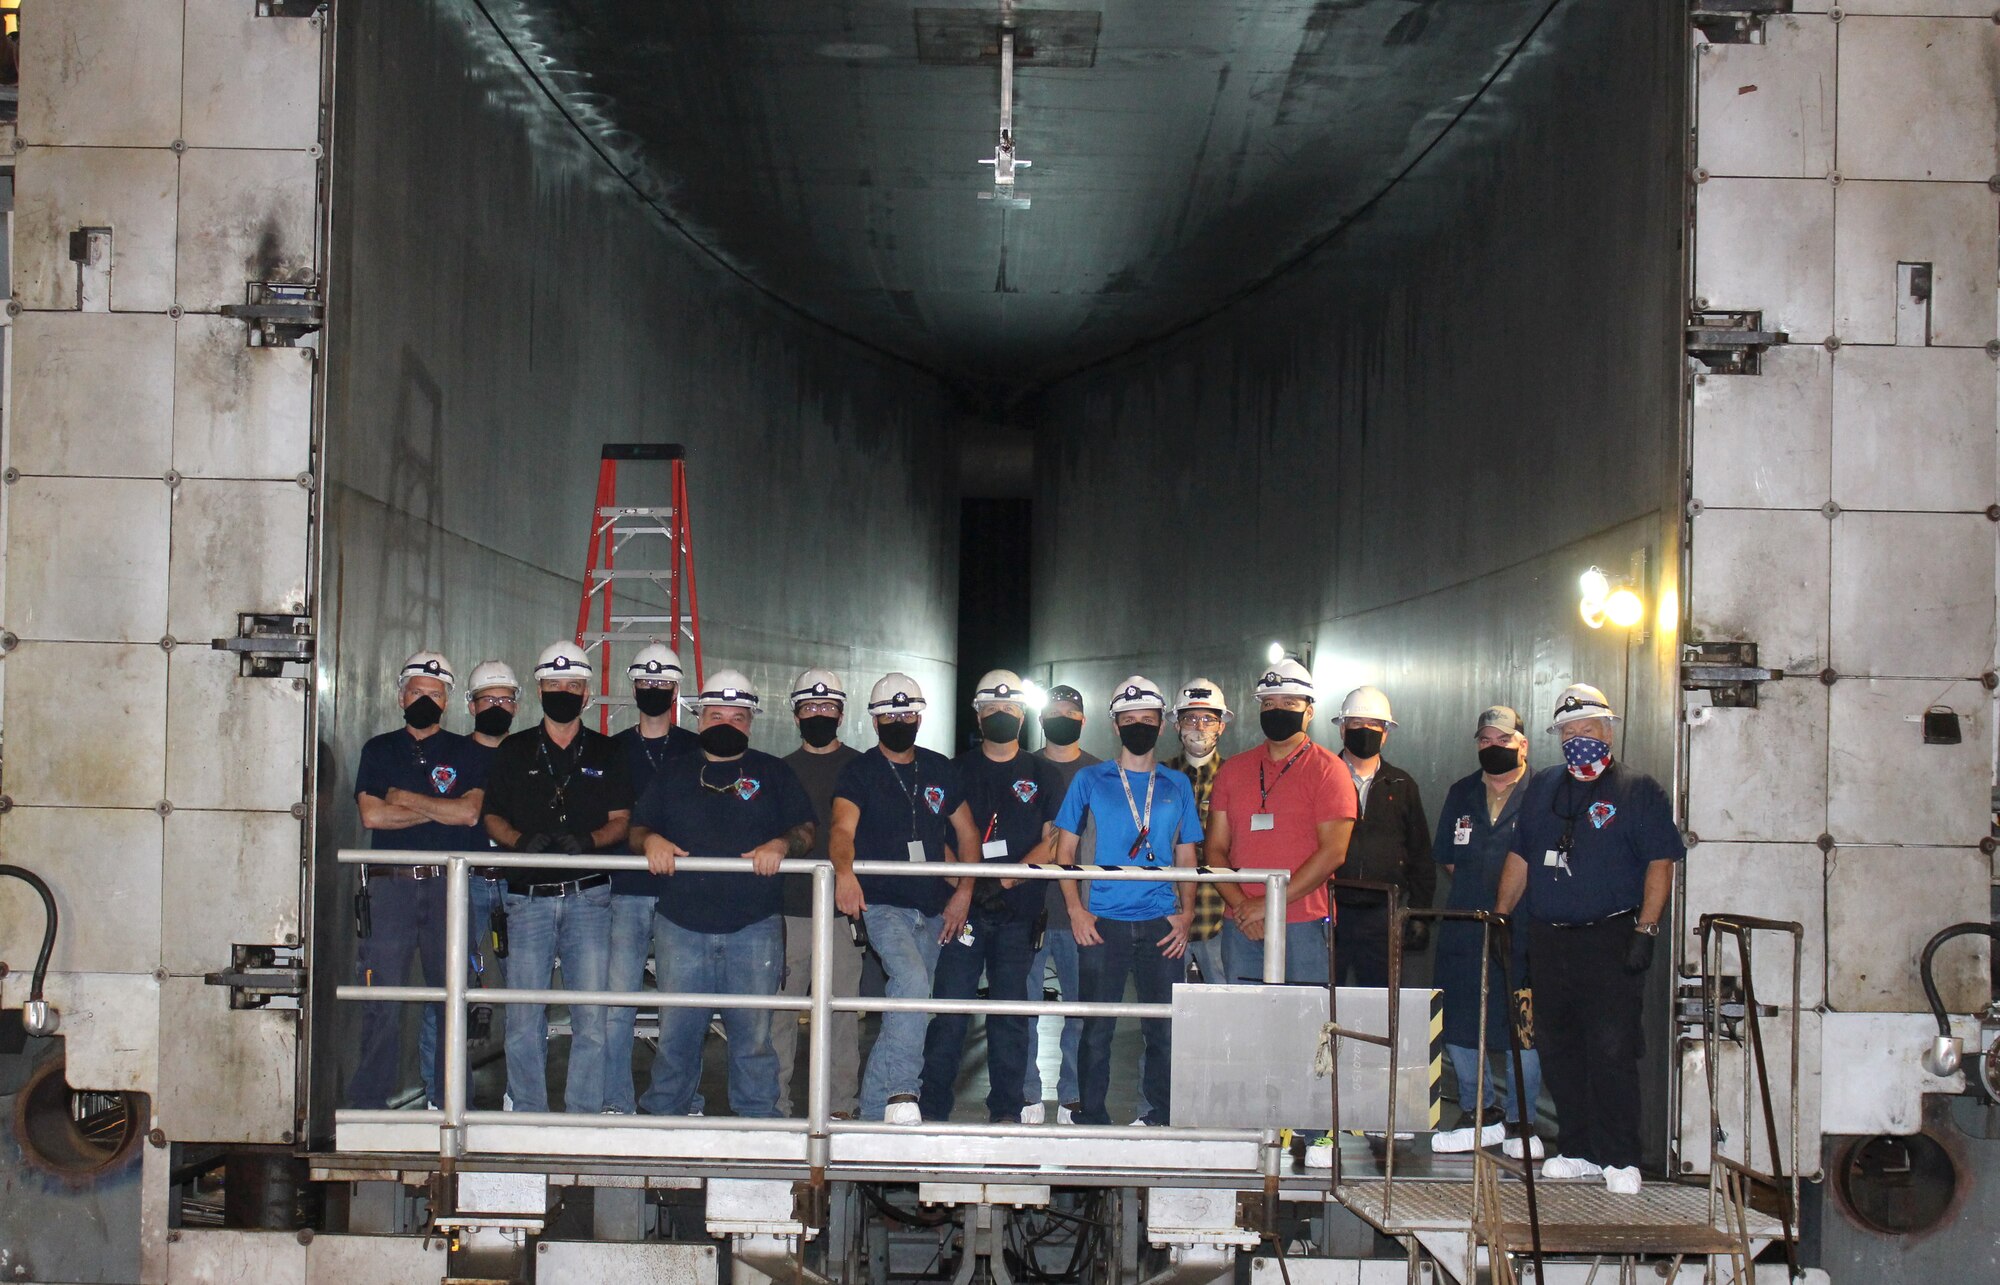 The team working to reactive the Arnold Engineering Development Complex 16-foot supersonic wind tunnel nozzle at Arnold Air Force Base stands in the nozzle of the test cell Sept. 25, 2020. The nozzle which has not been operational since a test in 1997 is now active. (U.S. Air Force photo by Deidre Moon) (This photo has been altered by obscuring badges for security purposes.)